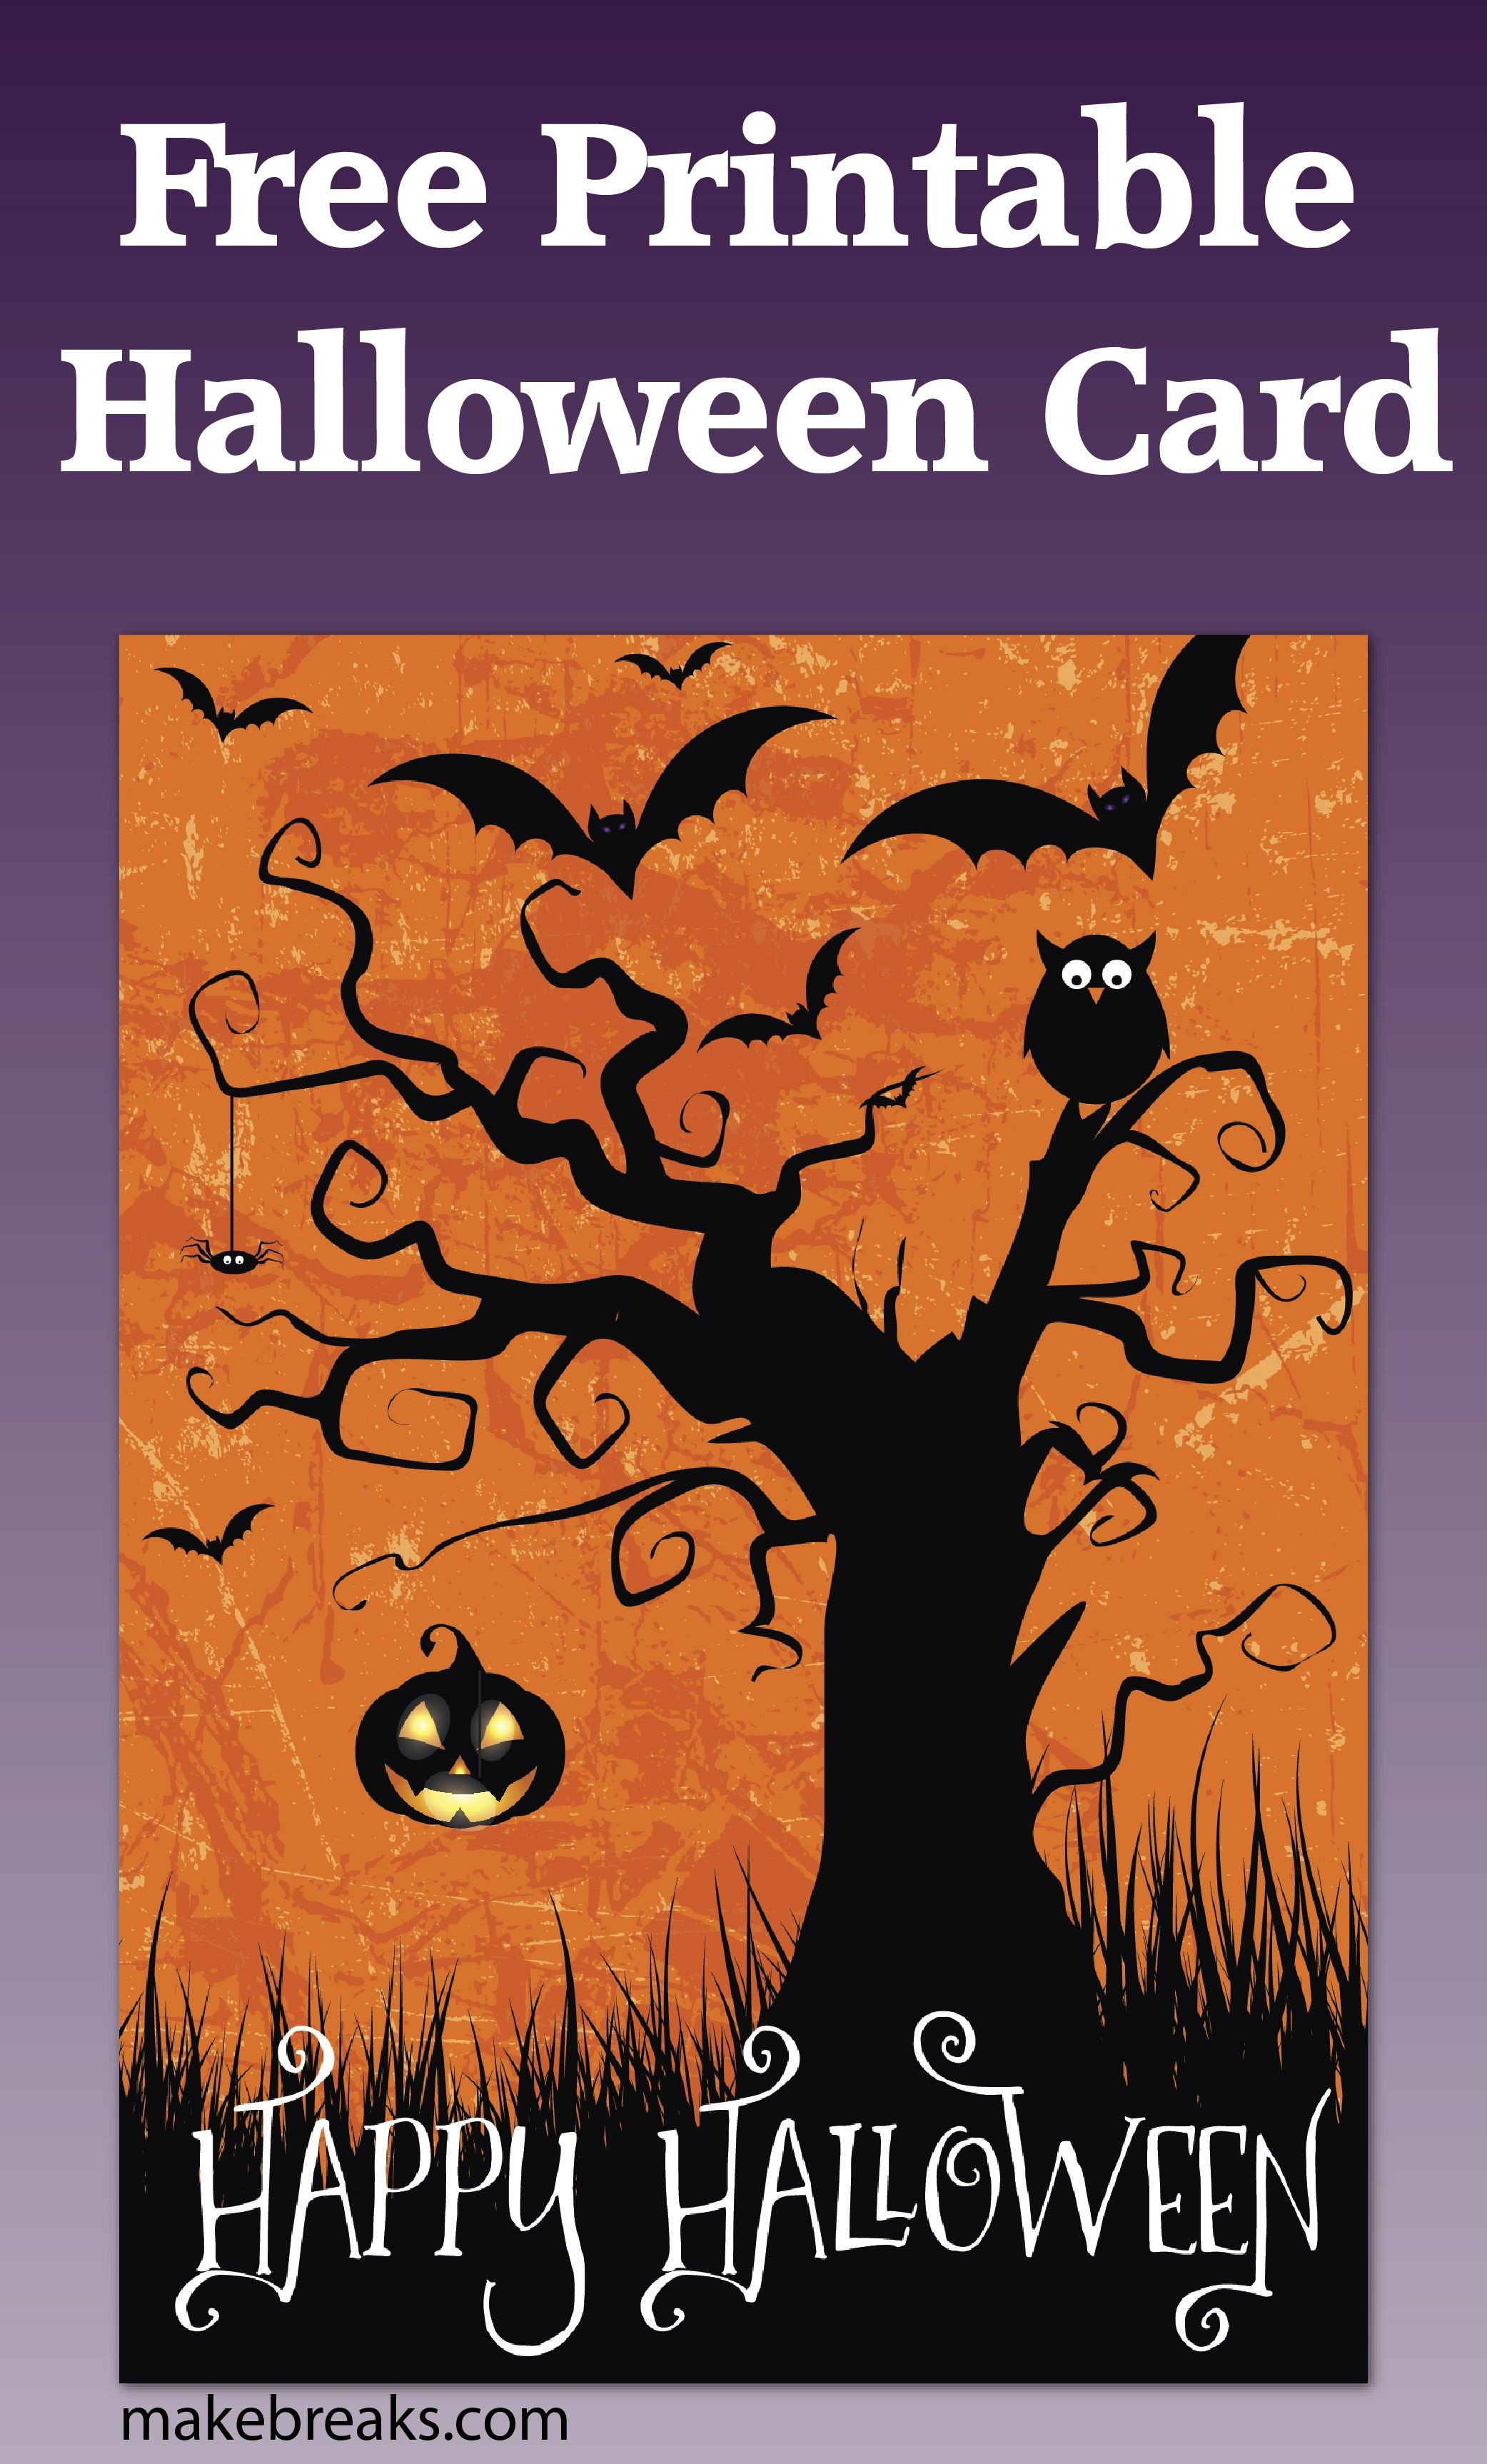 Free Printable Happy Halloween Card Or Party Invitation | Diy And - Free Printable Halloween Cards